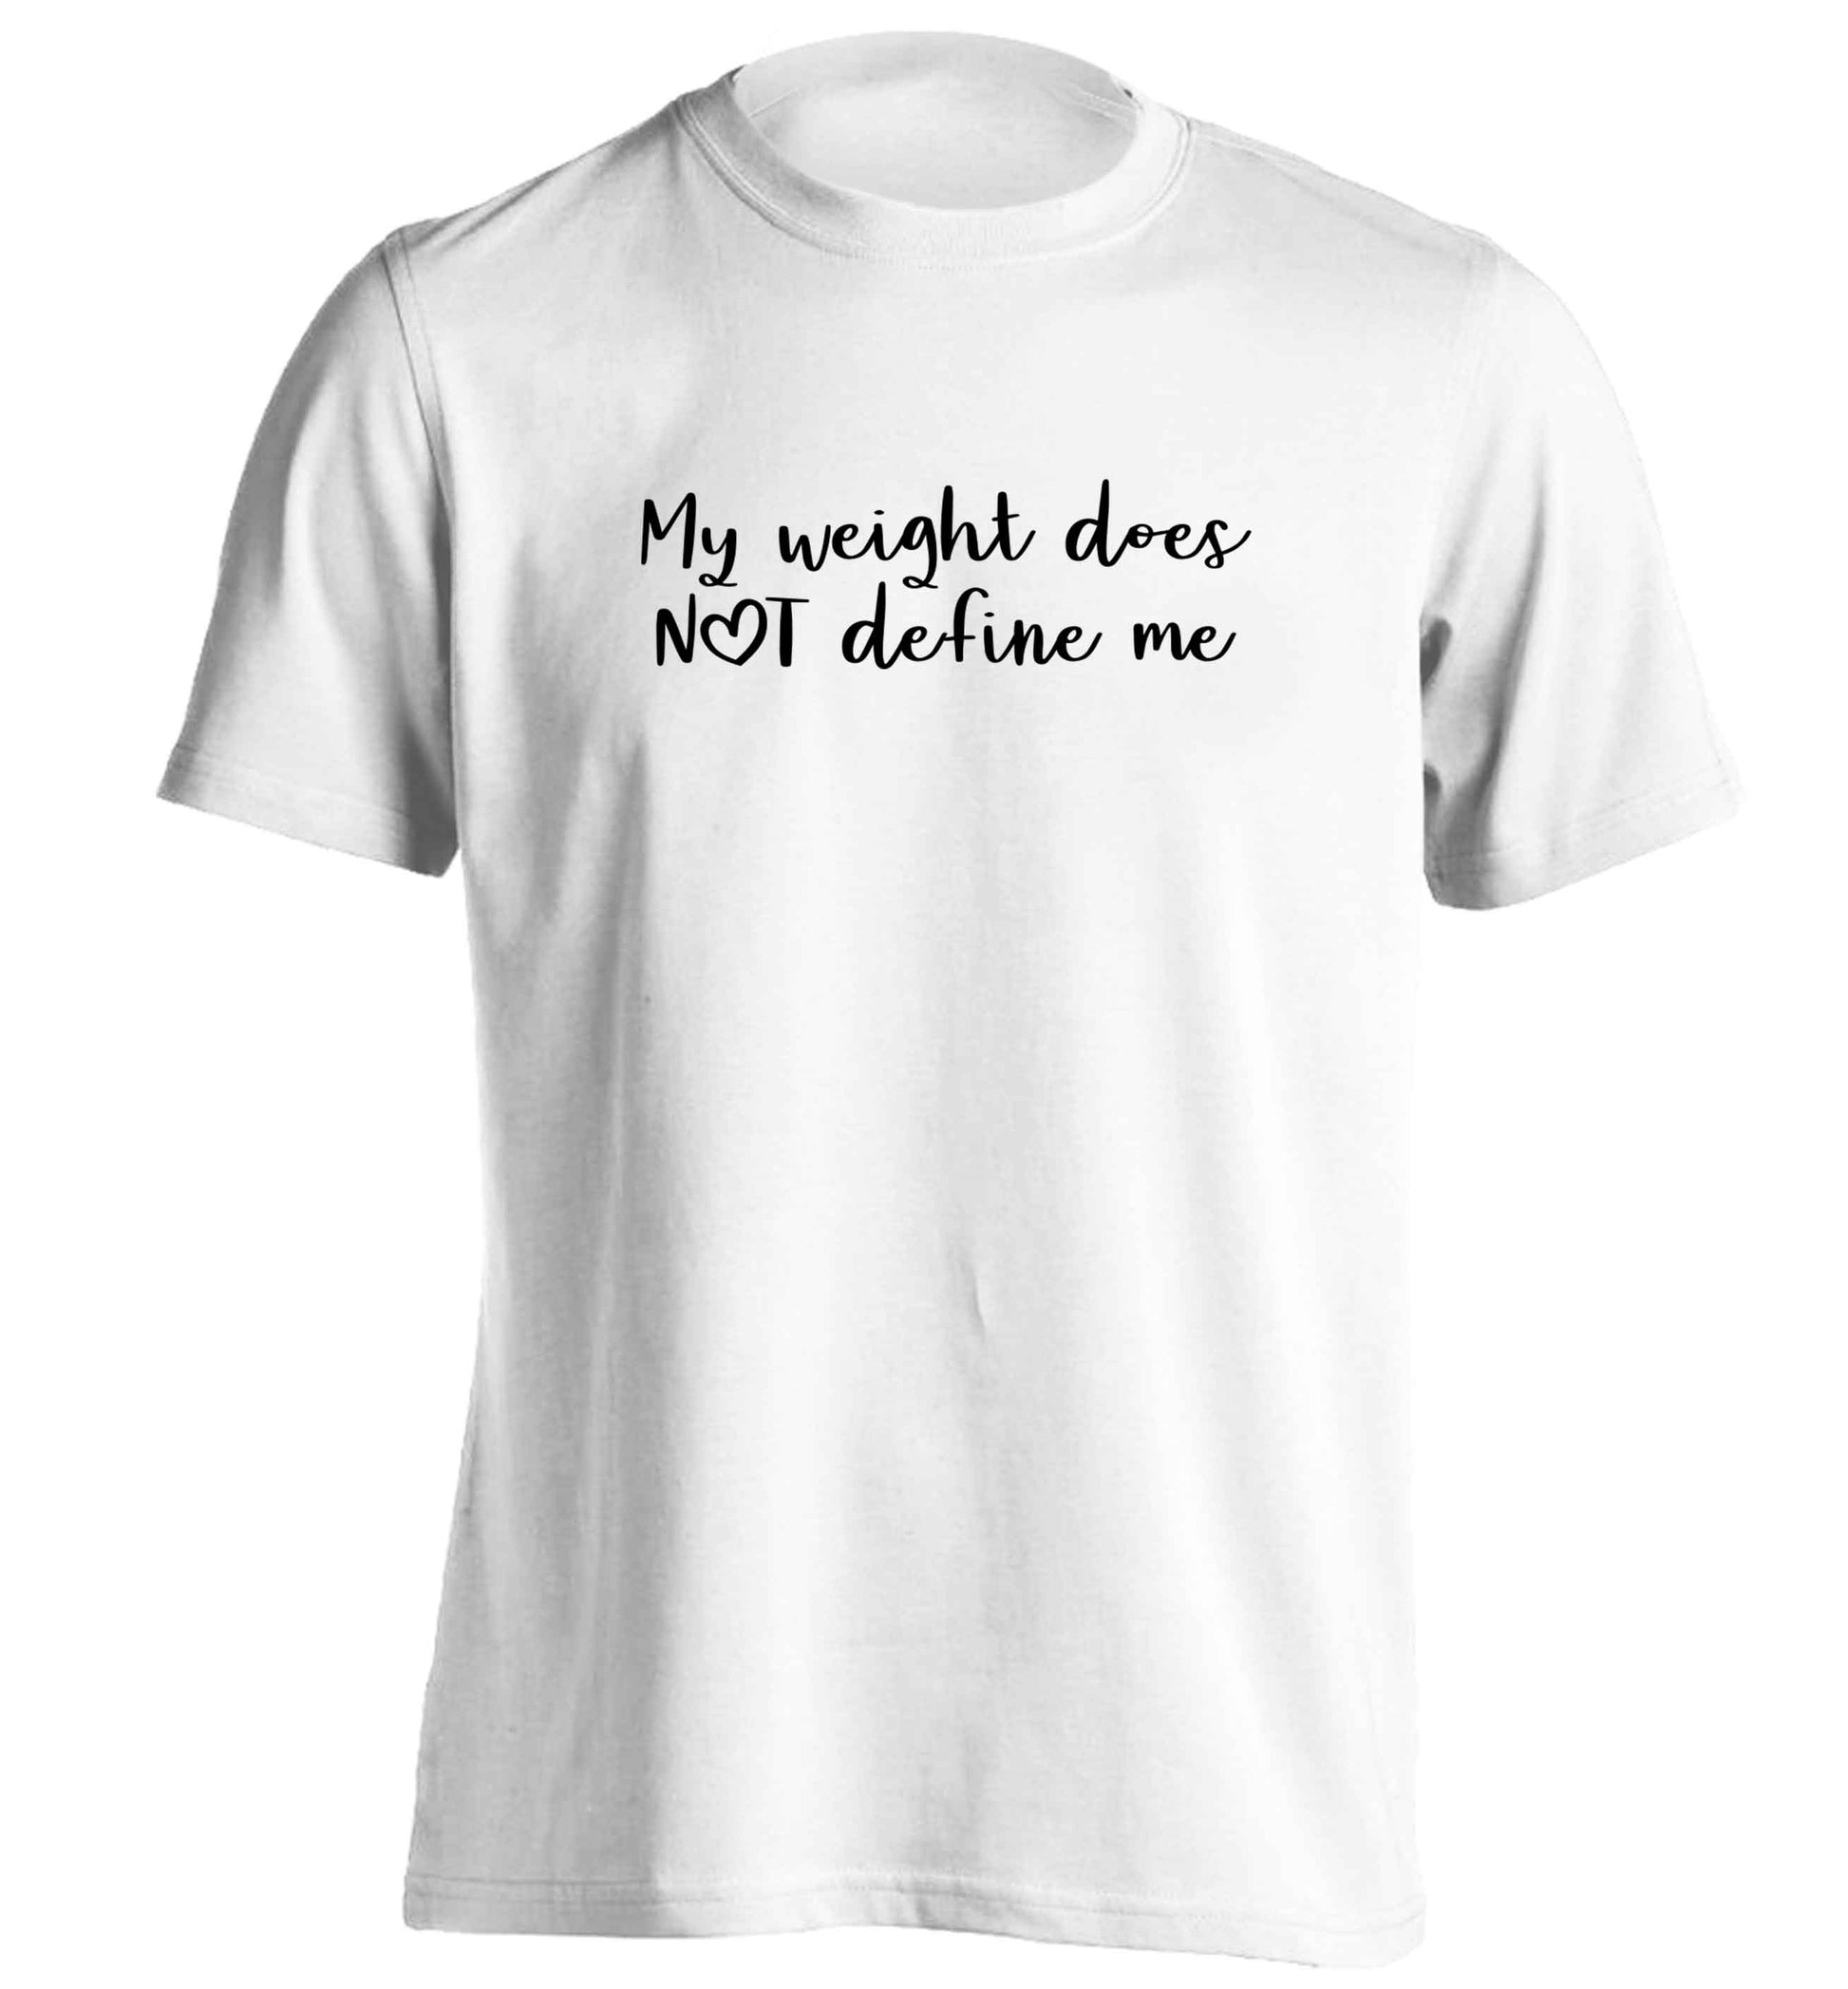 My weight does not define me adults unisex white Tshirt 2XL